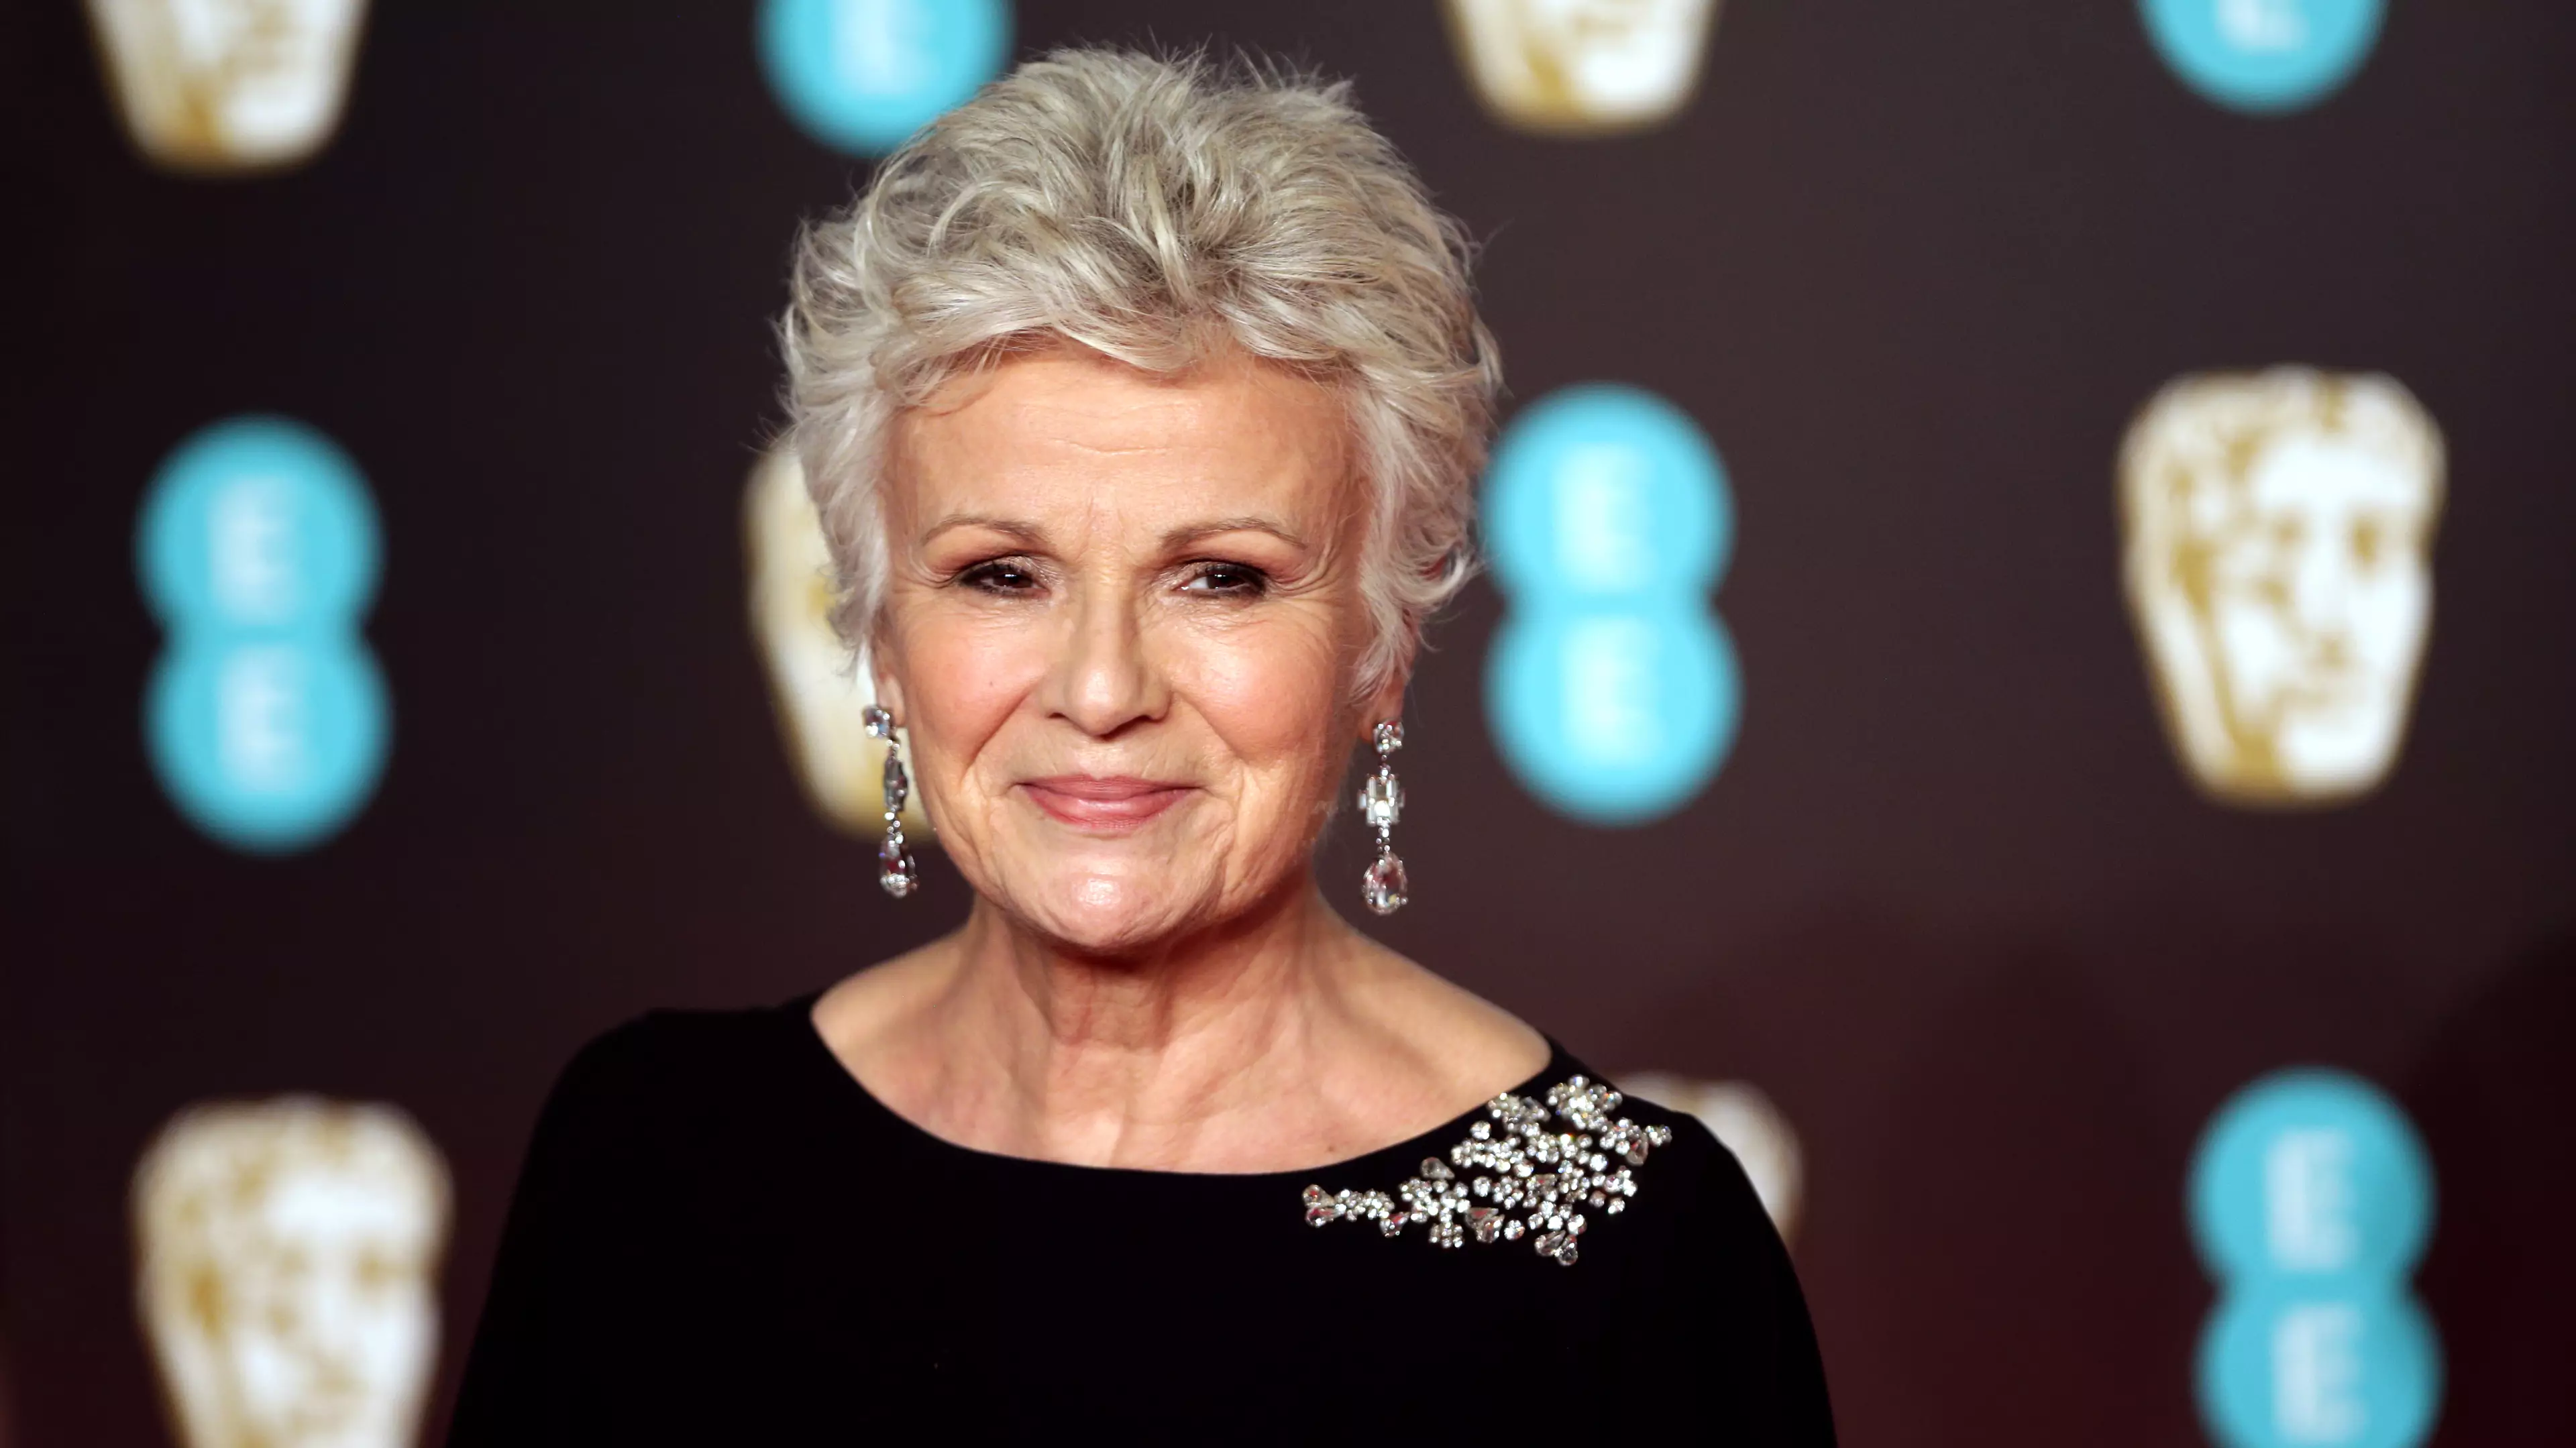 Julie Walters Reveals She Had Bowel Cancer But Is Now Cancer-Free